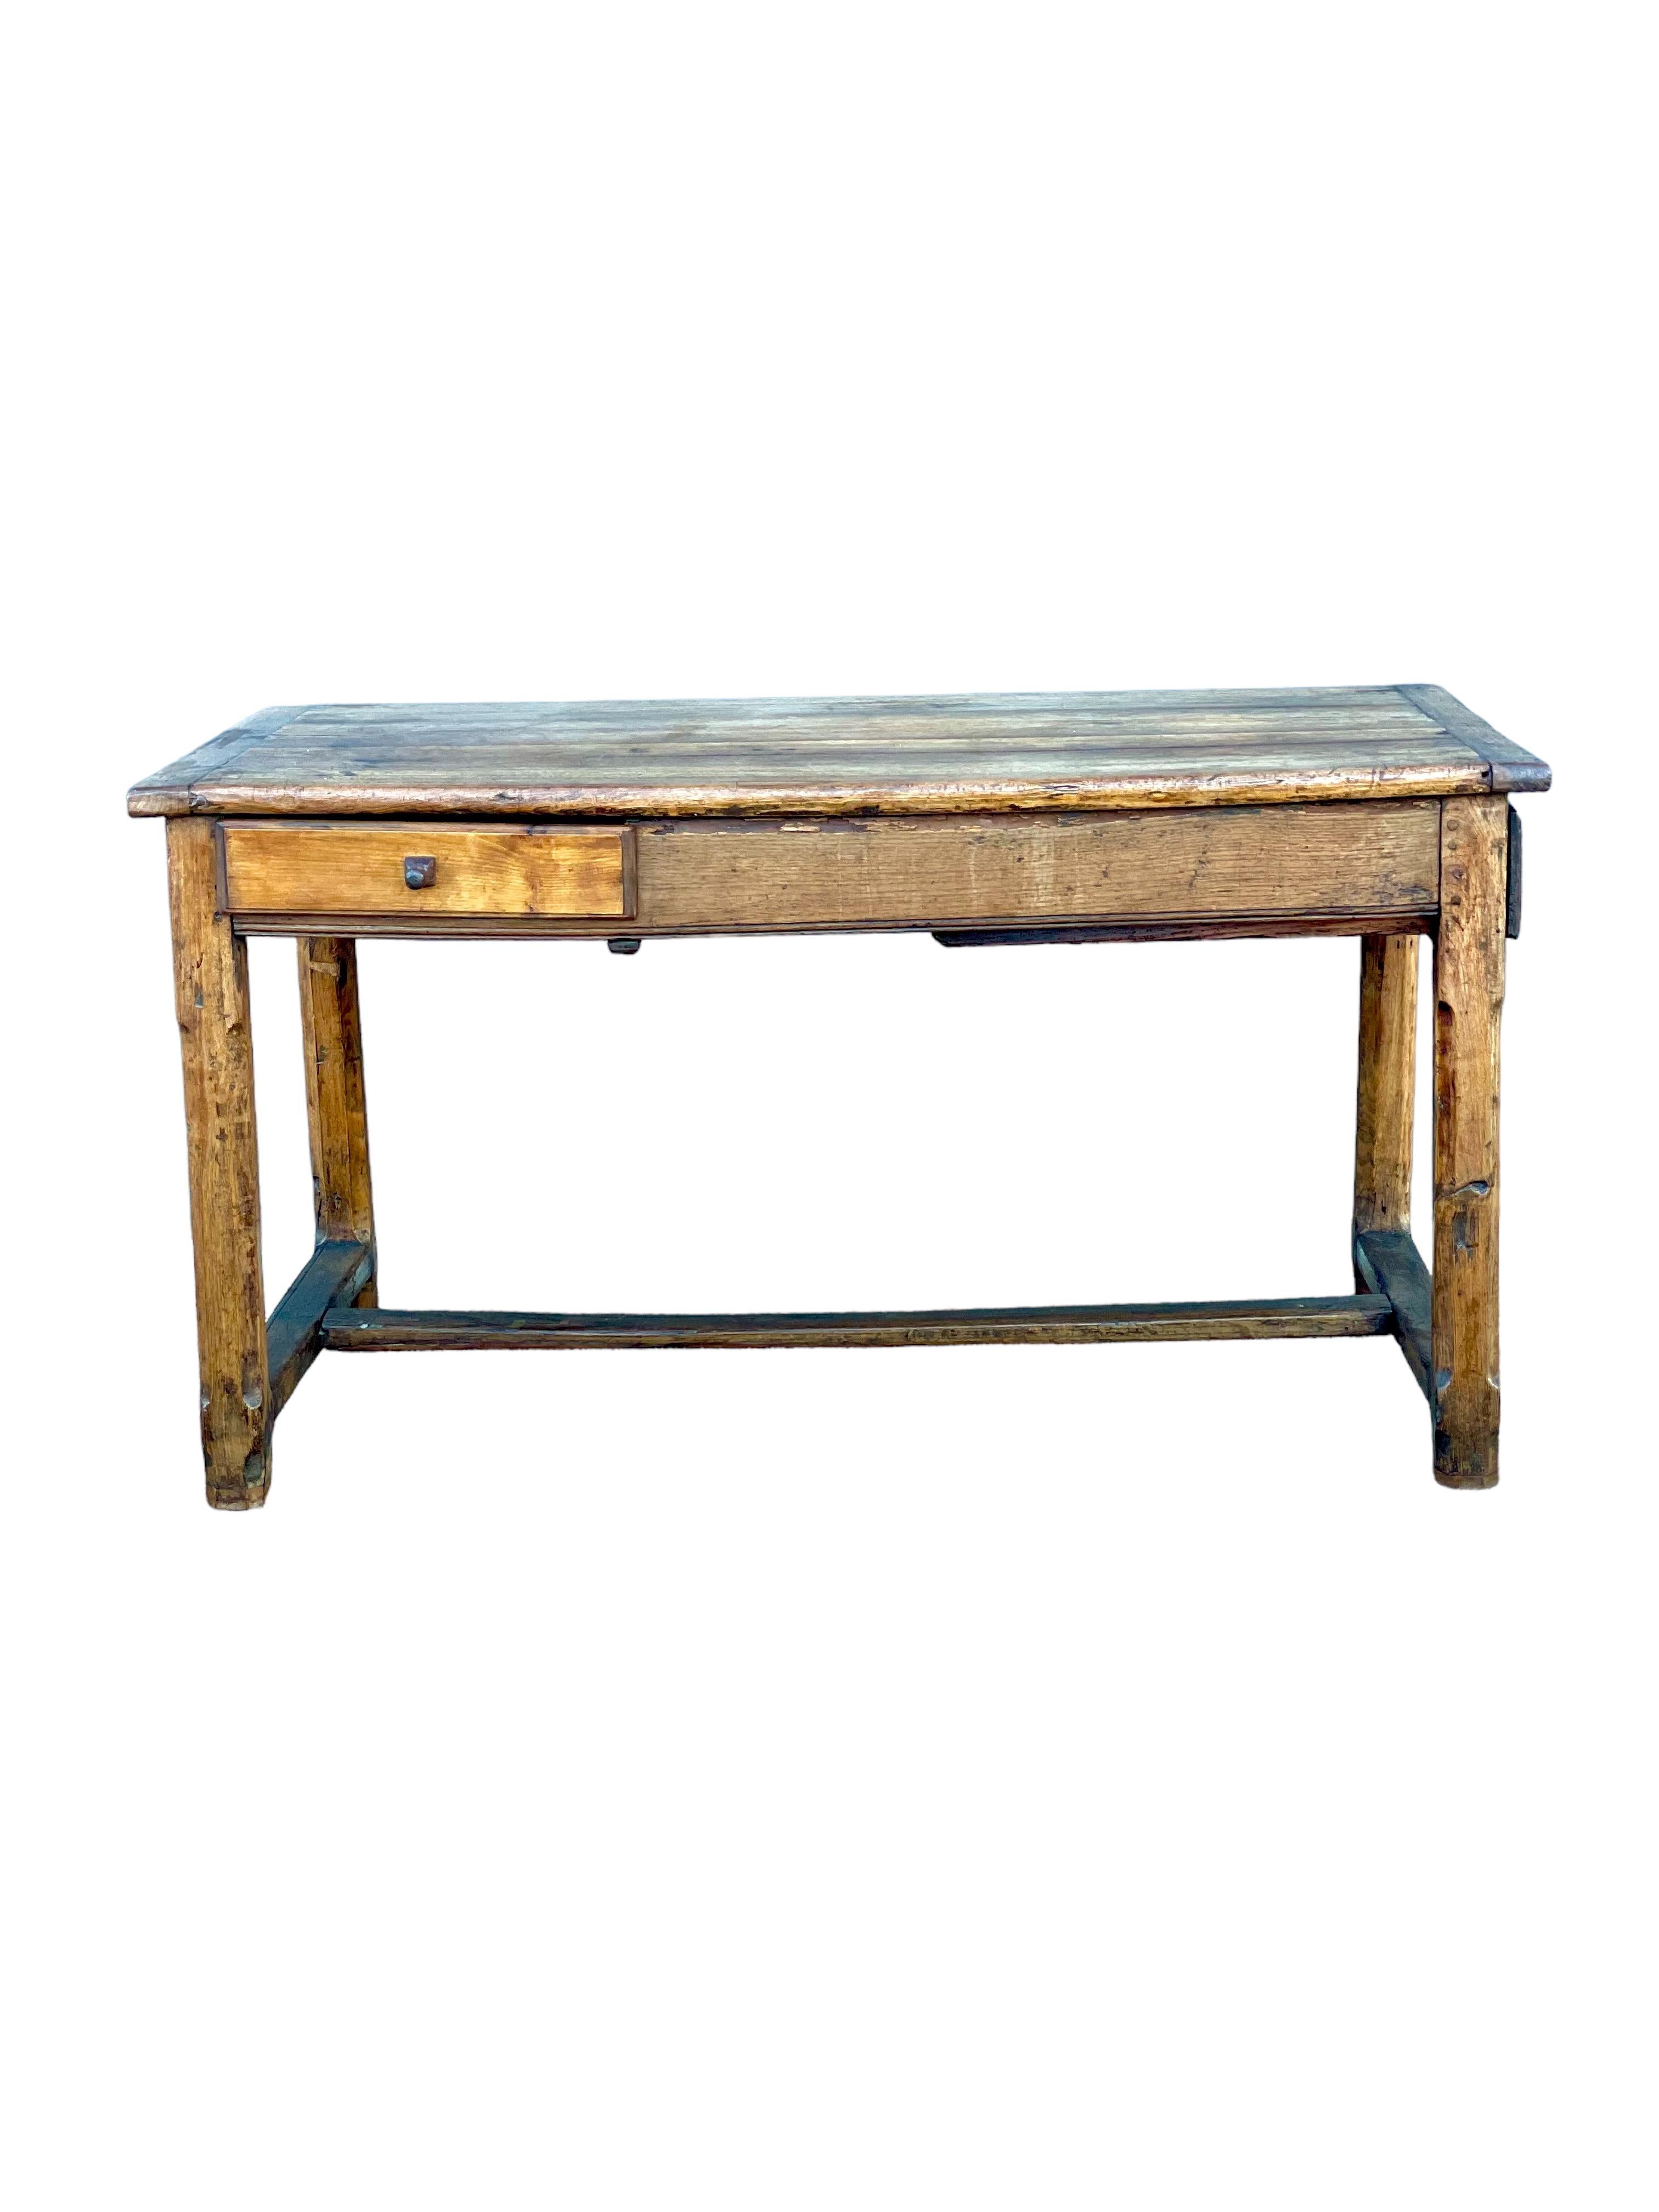 A rectangular antique farmhouse table, full of character, in solid, roughly-hewn oak, with cleated top, side and end drawers and entretoise connecting its chamfered square-section legs. Shows a real history of kitchen work with its faded top and